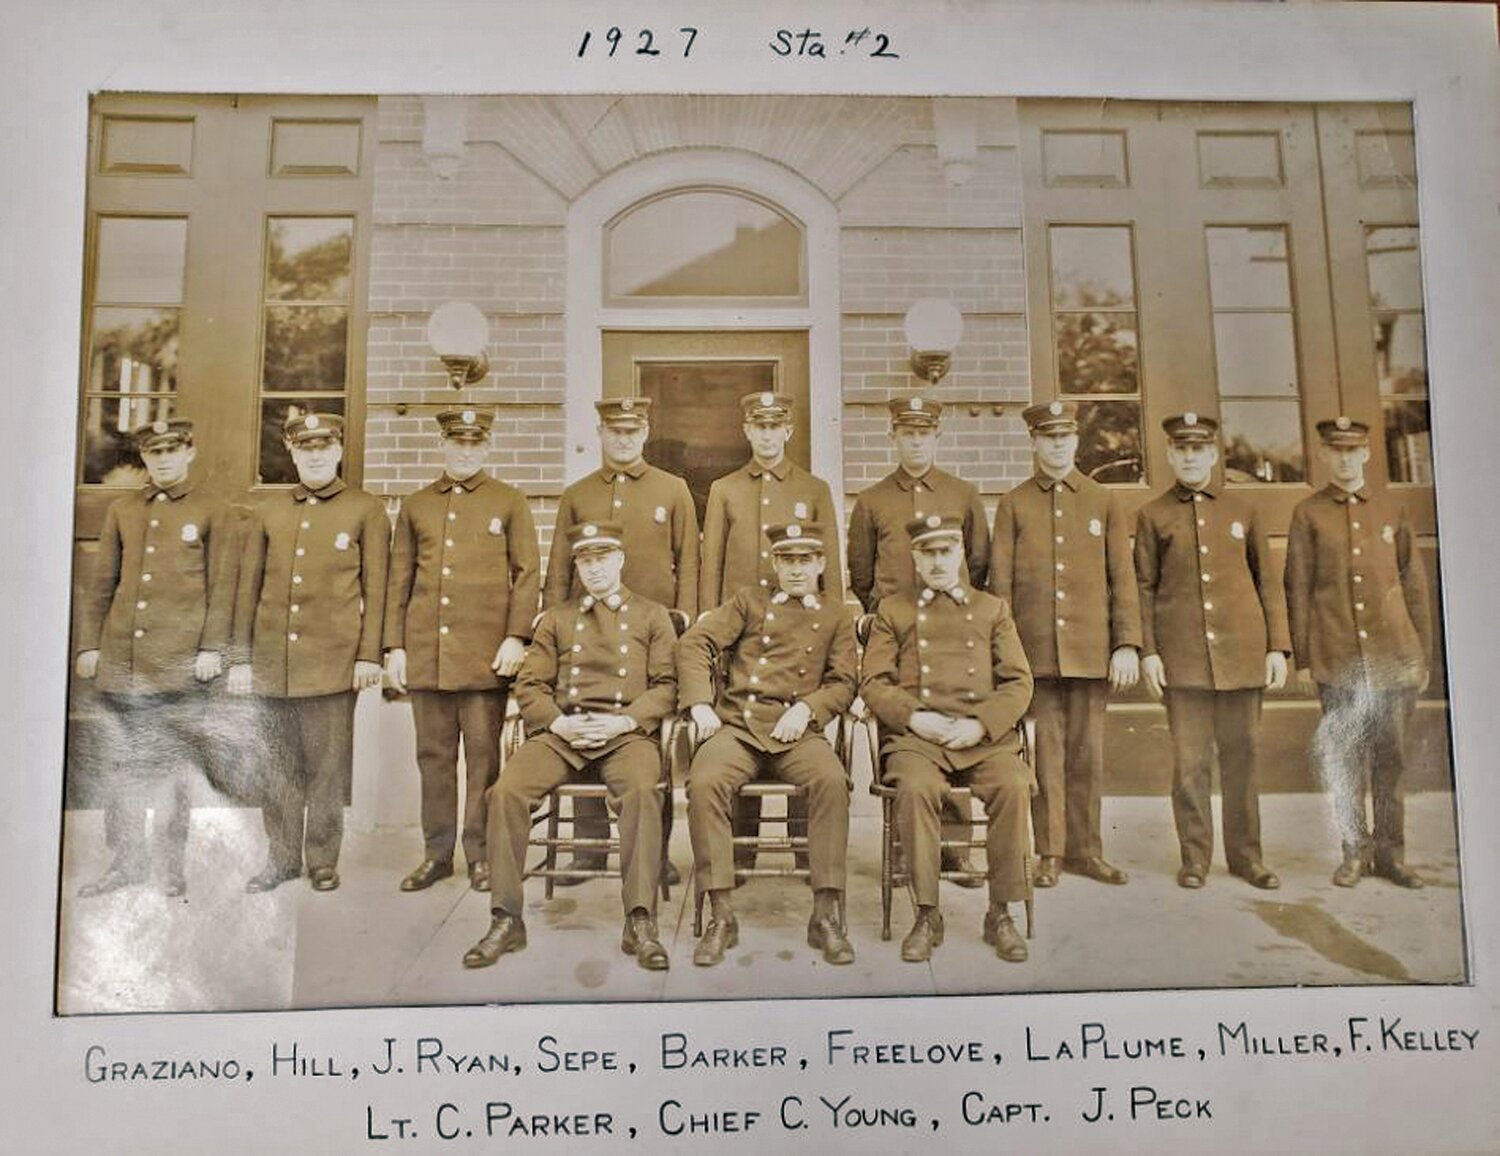 A 1927 photo of Fire Station 2 and its crew submitted by current Fire Chief James Warren